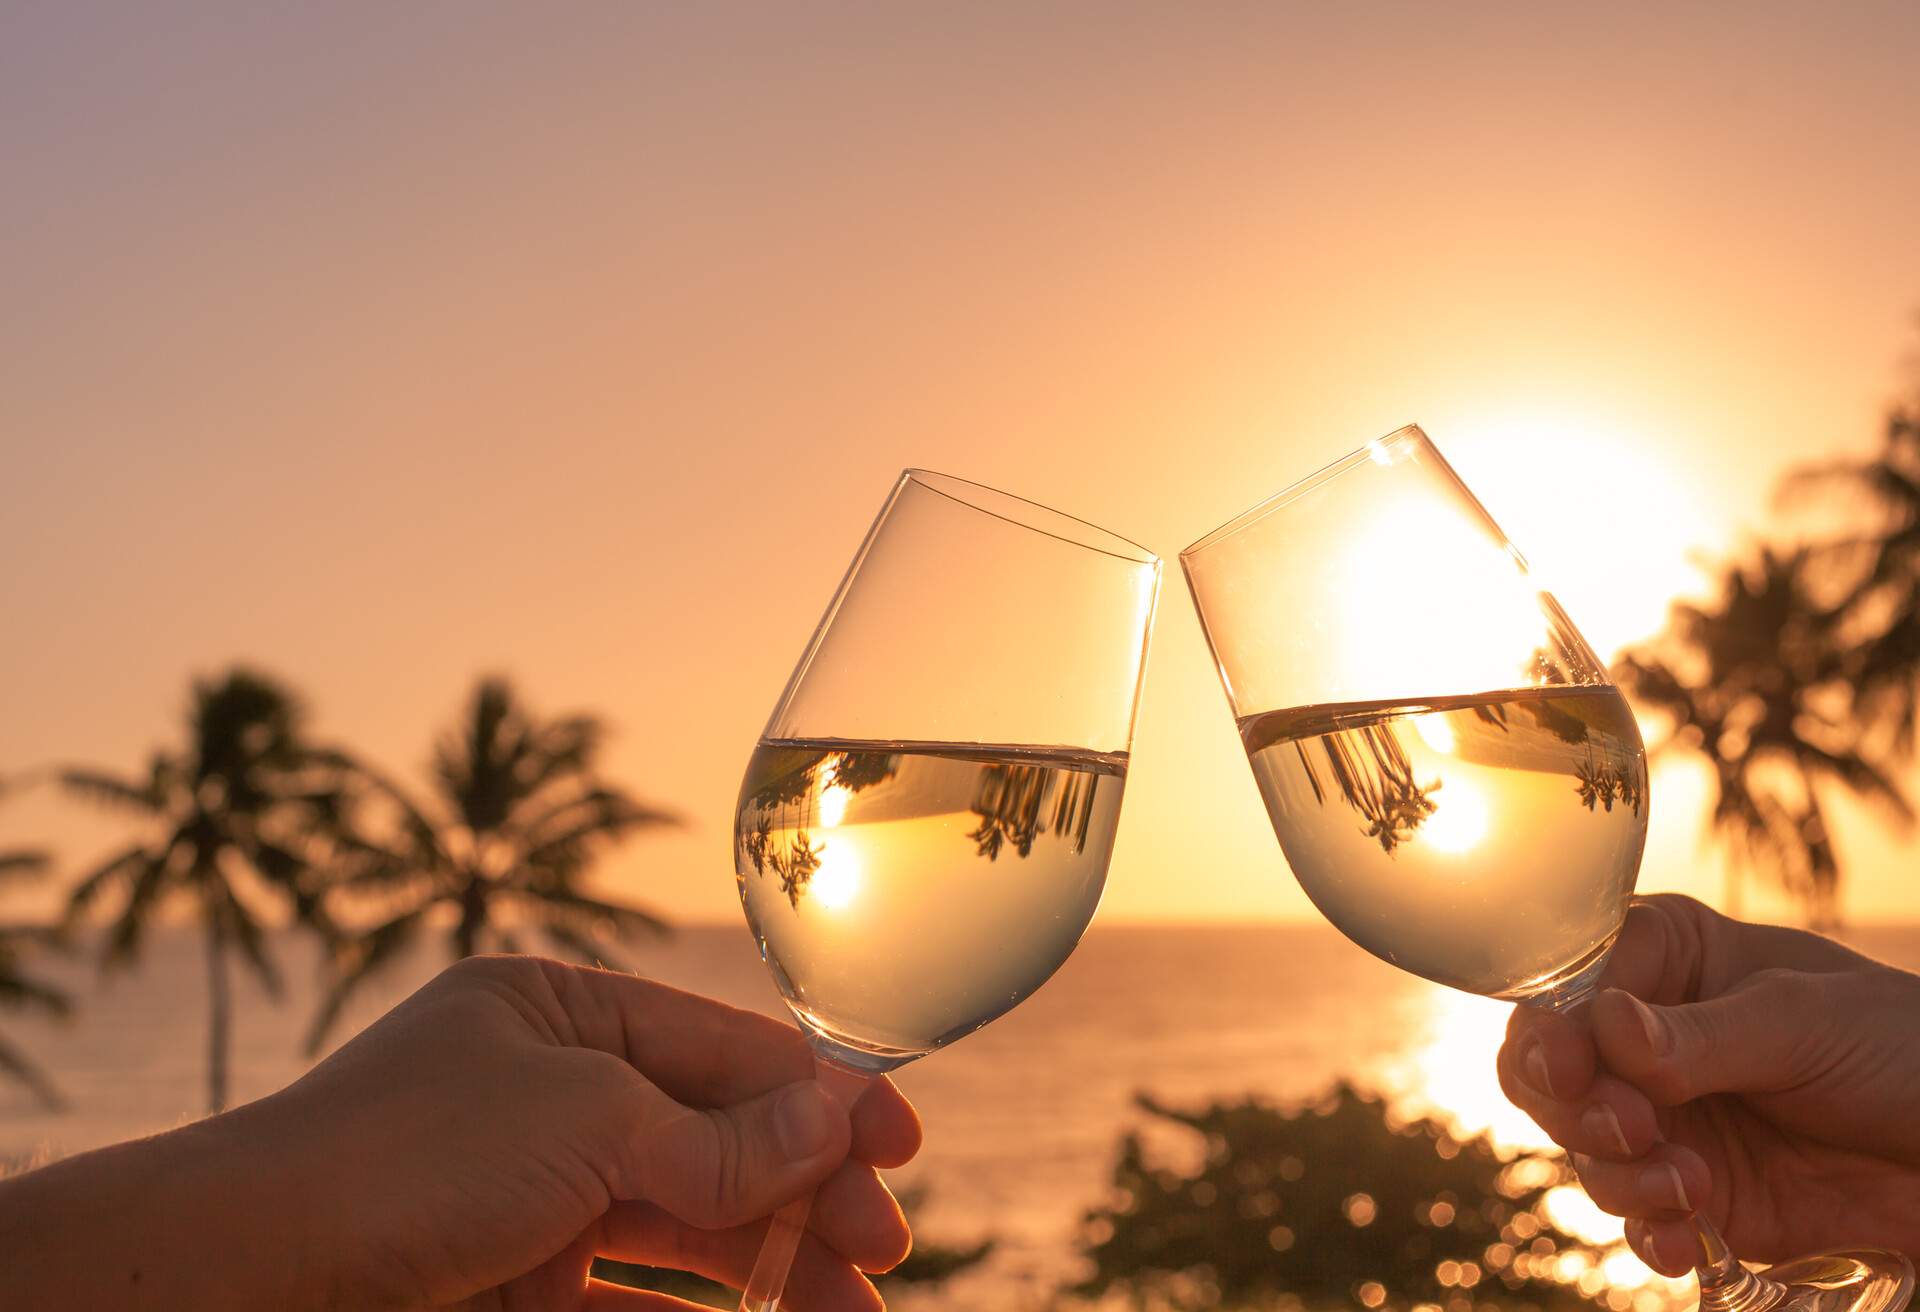 Cheers with wine glasses in a beautiful sunset beach setting.